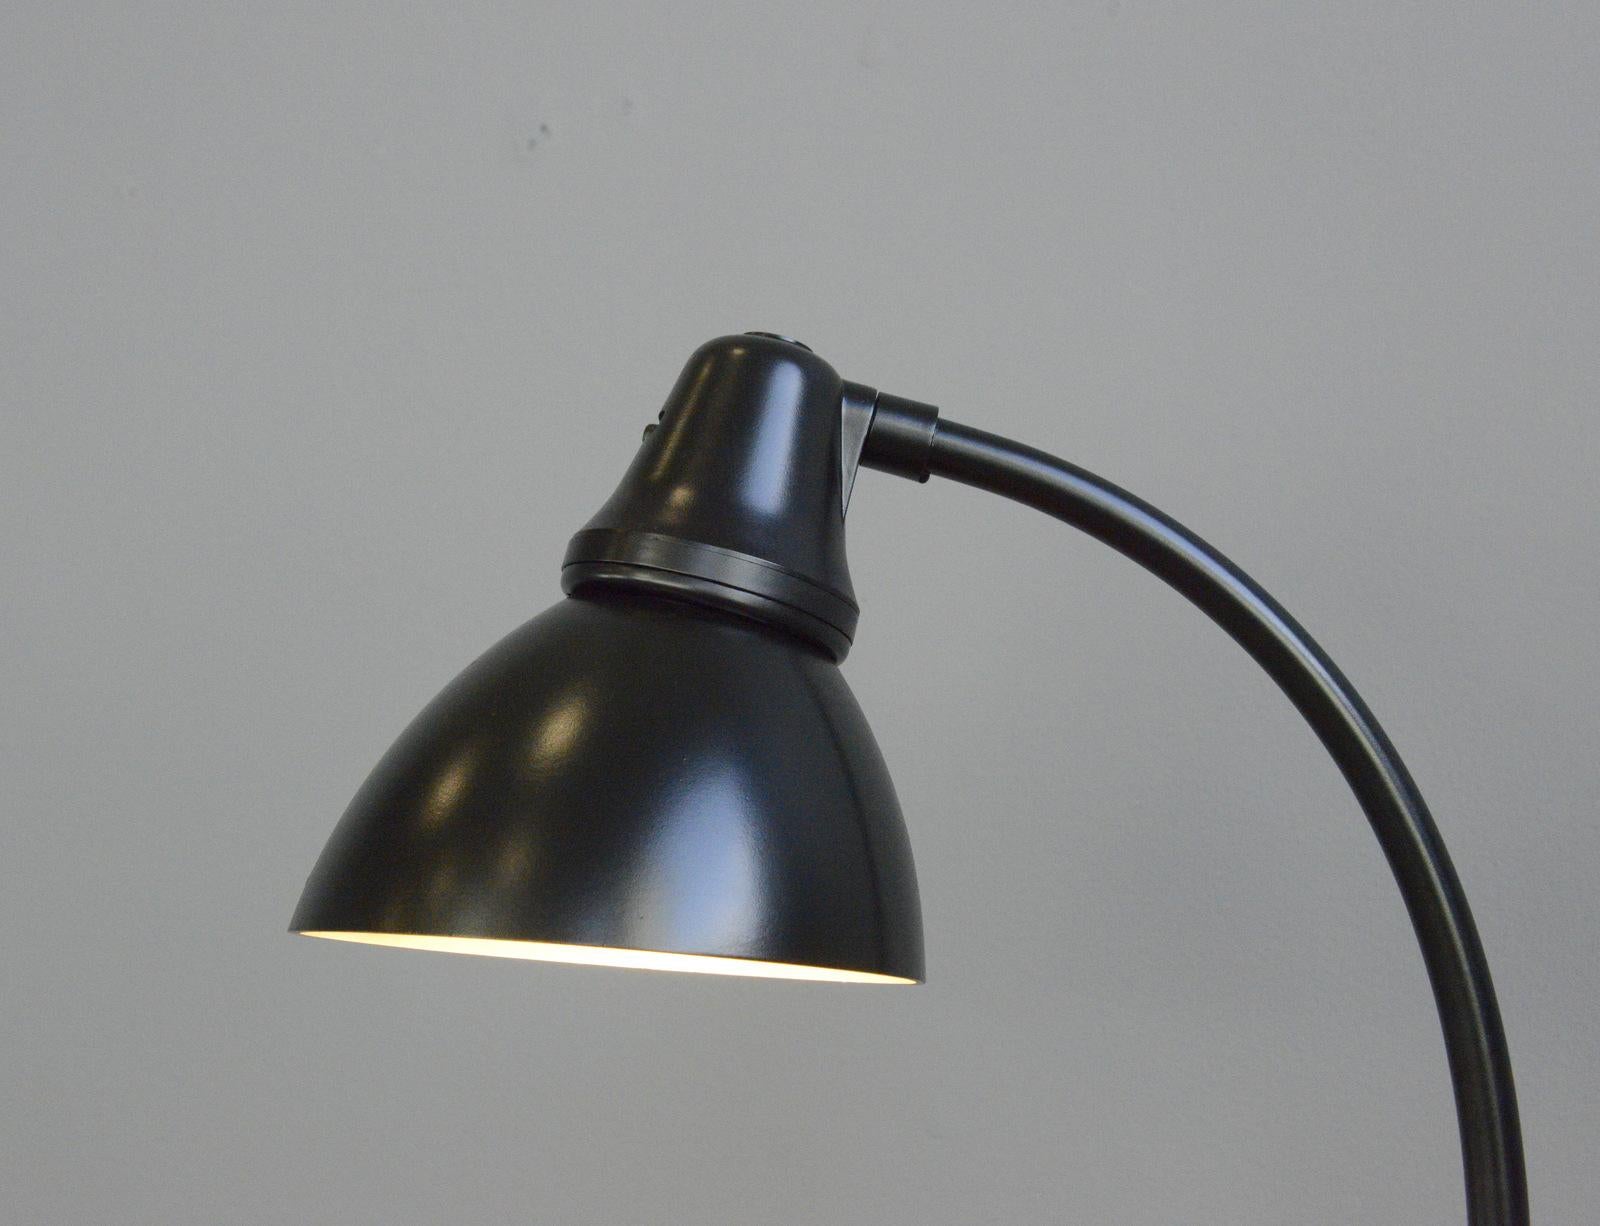 Bauhaus table lamp by Peter Behrens for AEG, circa 1920s

- Curved steel arm
- Bakelite base and shade
- De bossed 